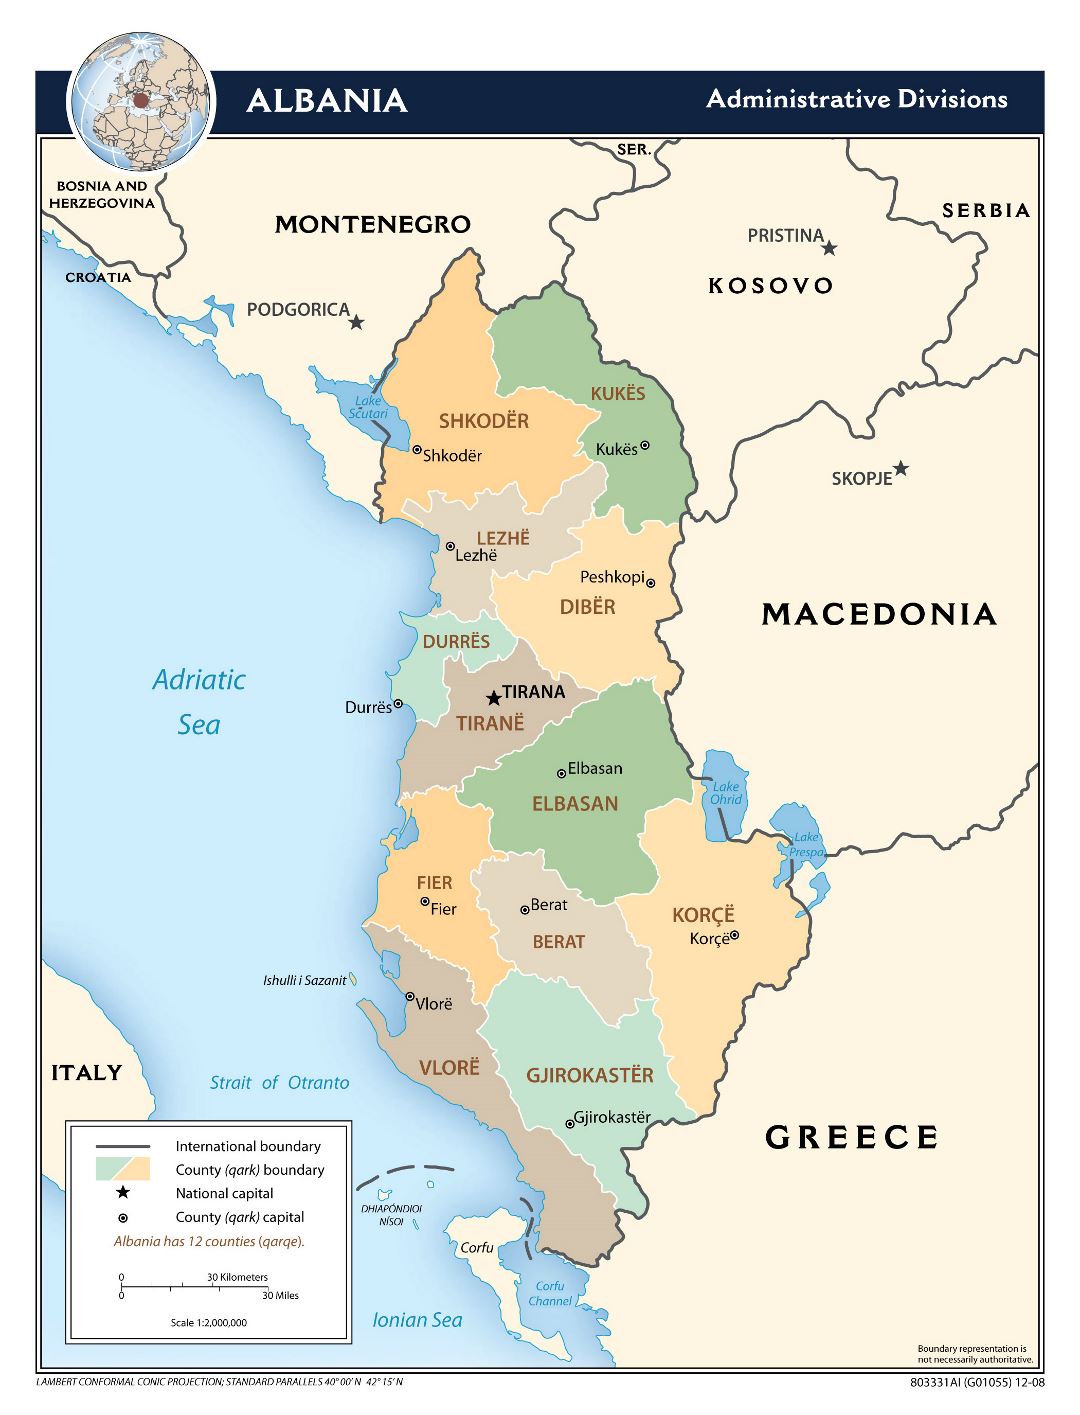 Large scale administrative divisions map of Albania - 2008